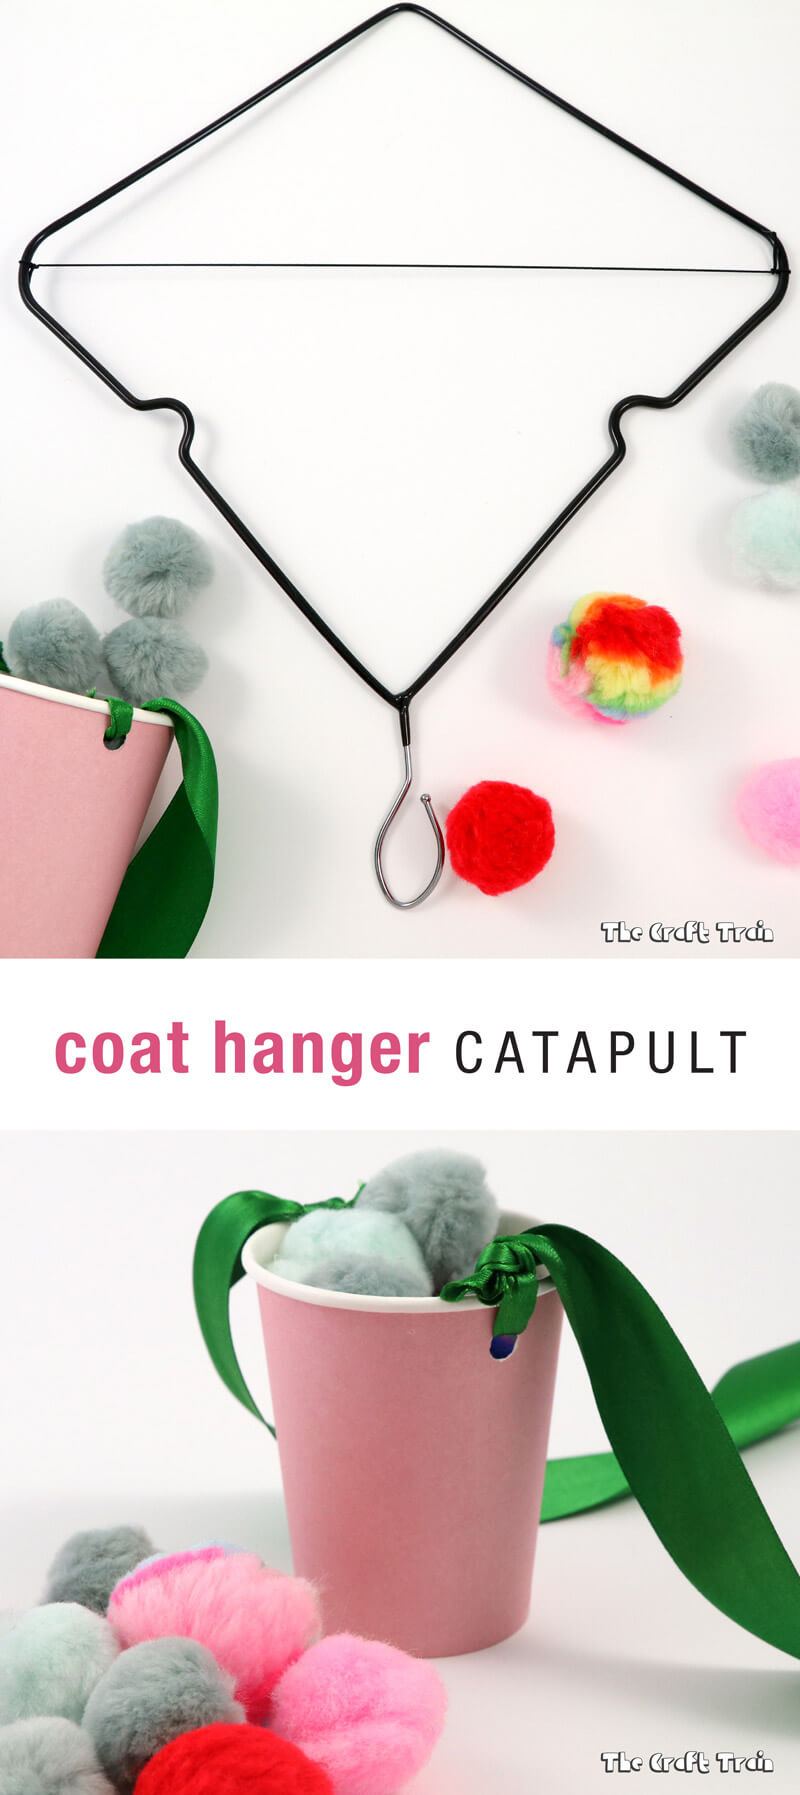 Coat hanger catapult craft: Make a simple catapult by upcycling a wire coat hanger. This is a fun STEAM activity for kids which also makes a great DIY toy.